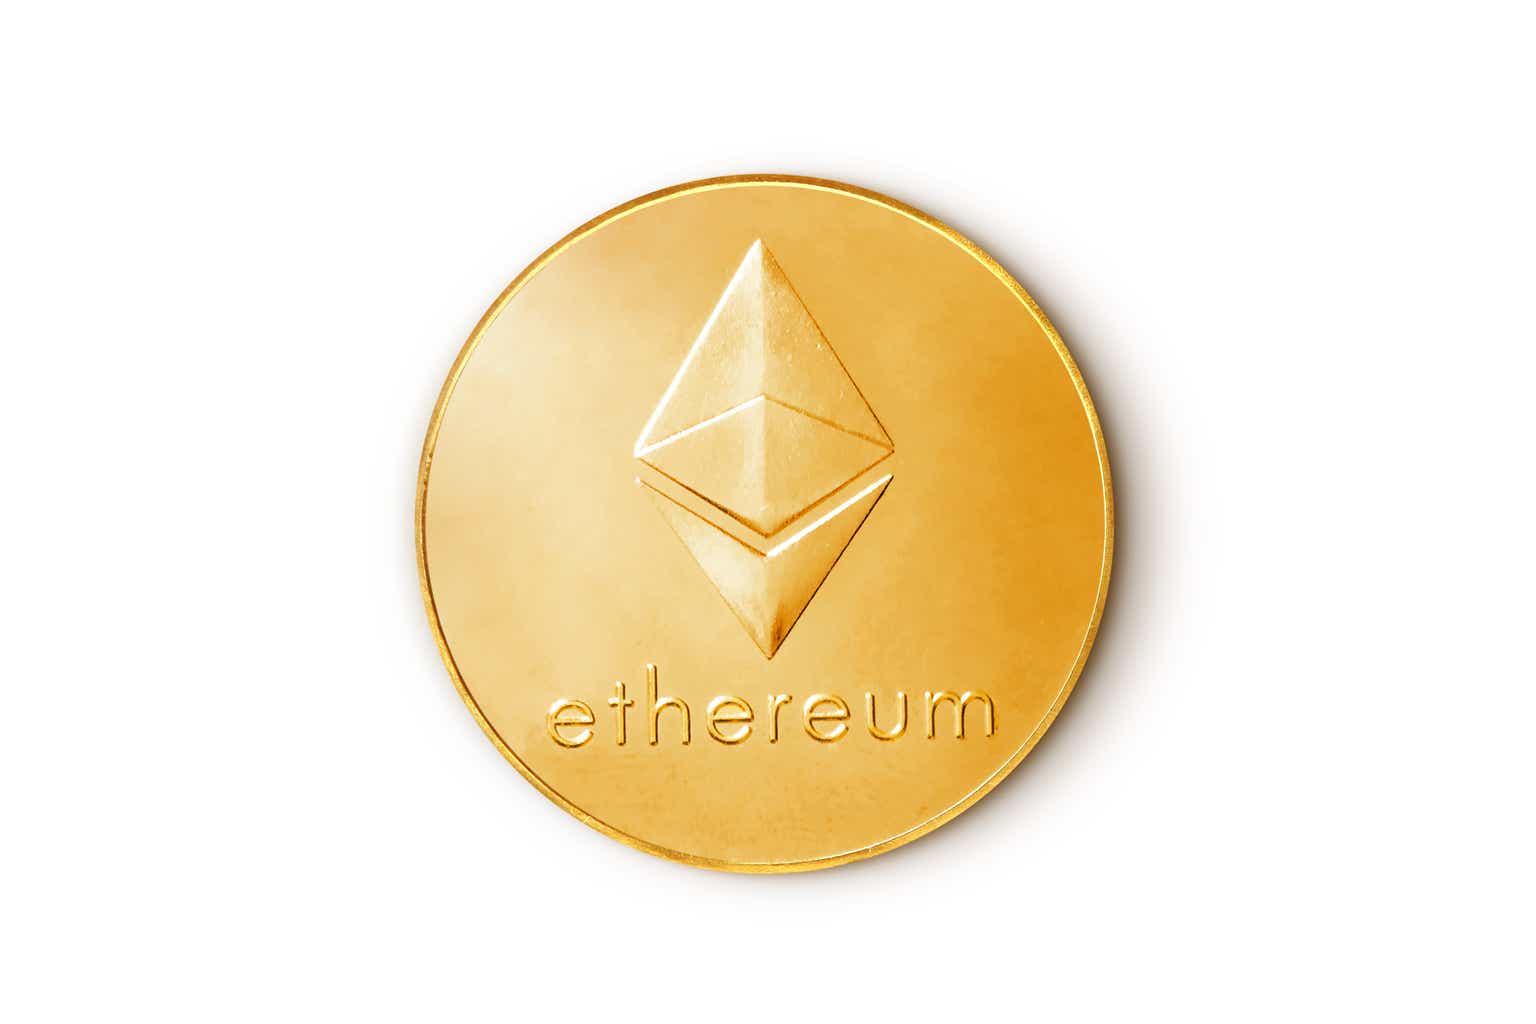 does ethereum have intrinsic value